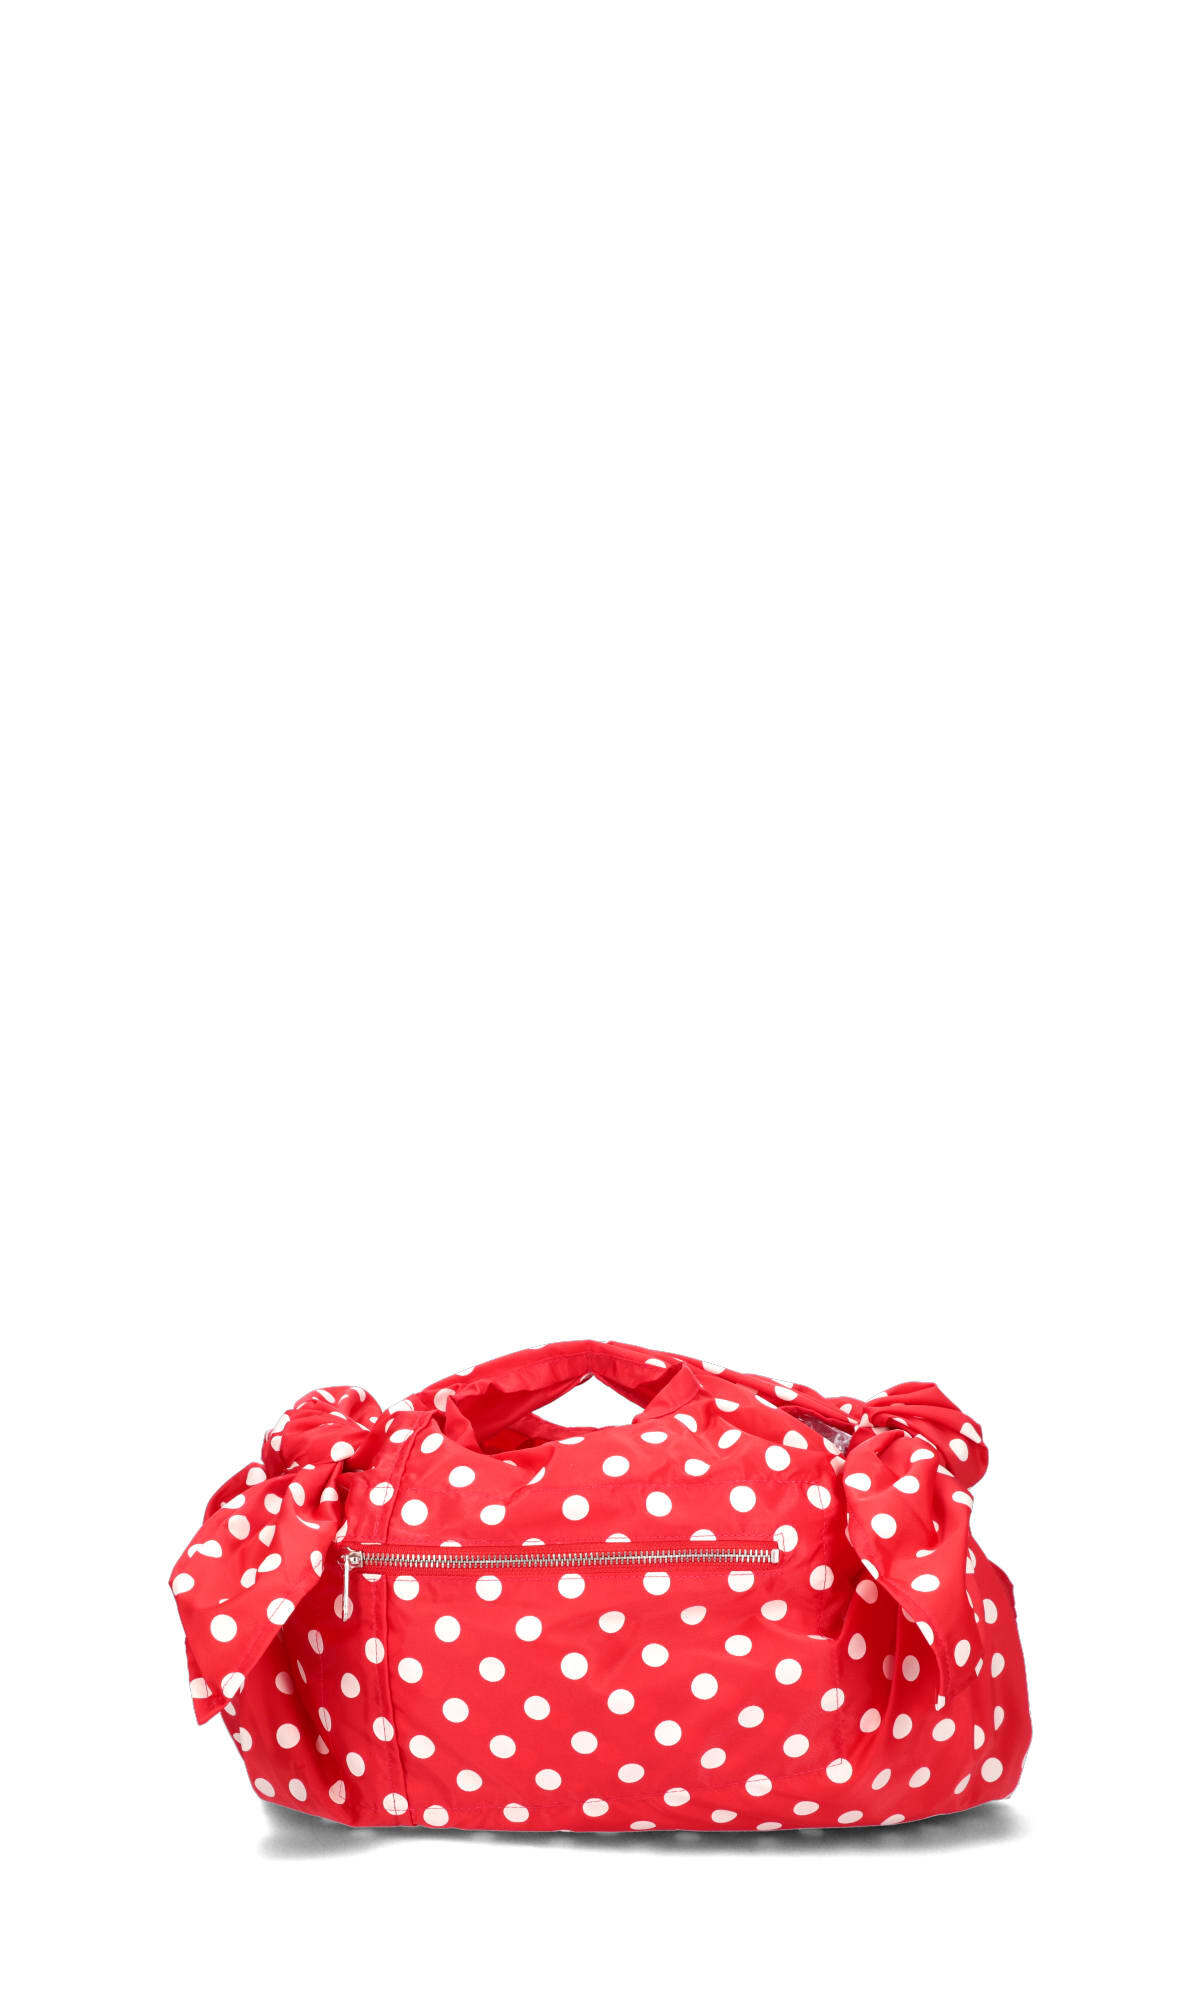 Comme Des Garçons Girl Tote in red